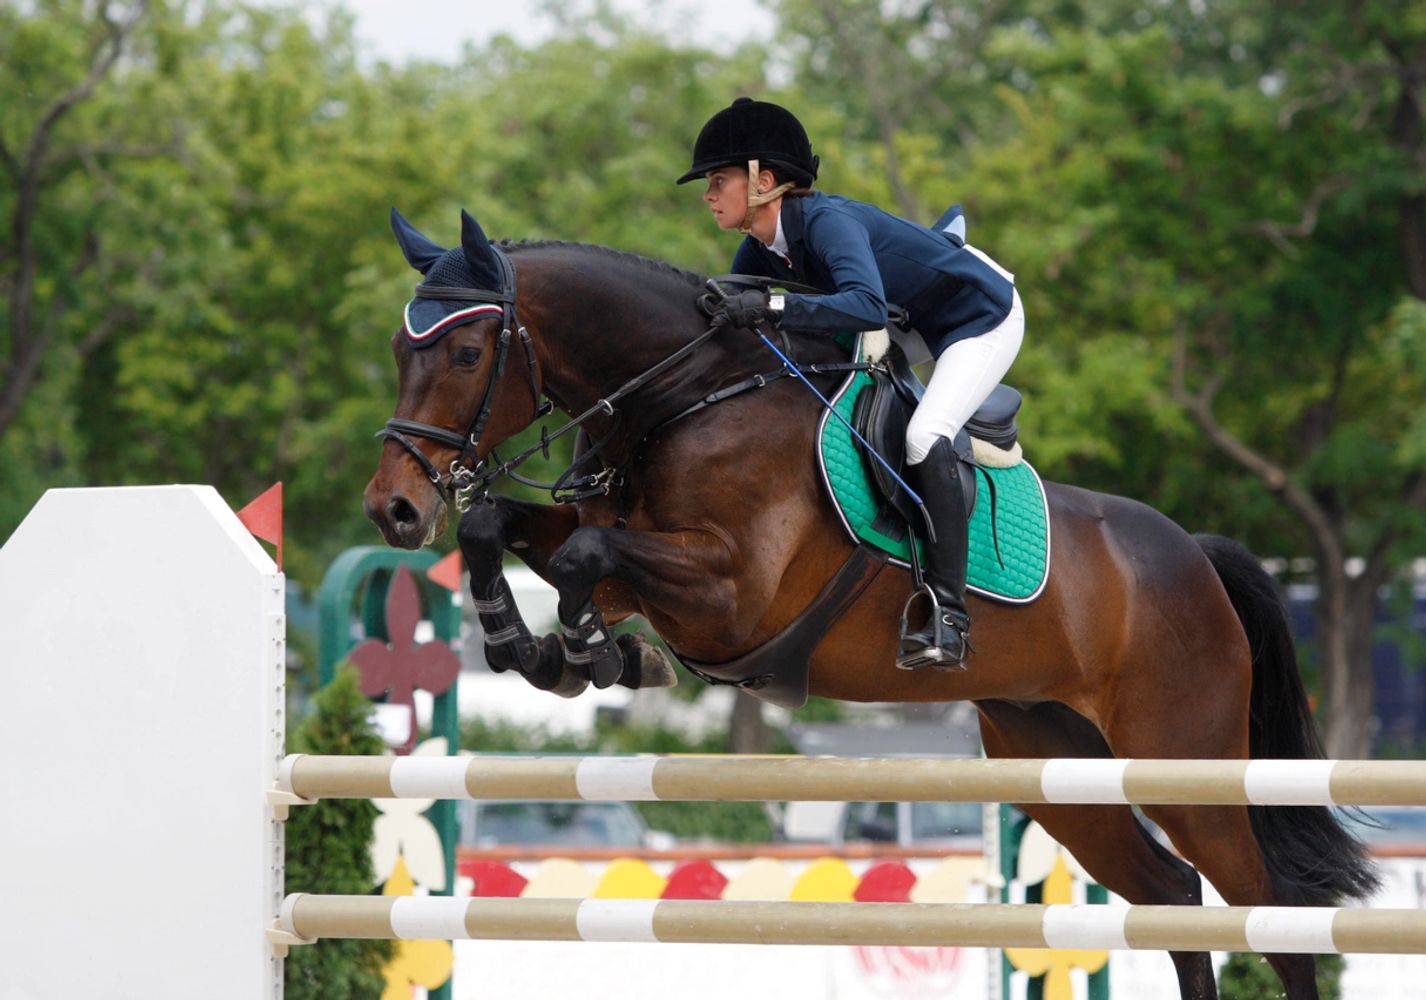 Lady rider and horse Showjumping